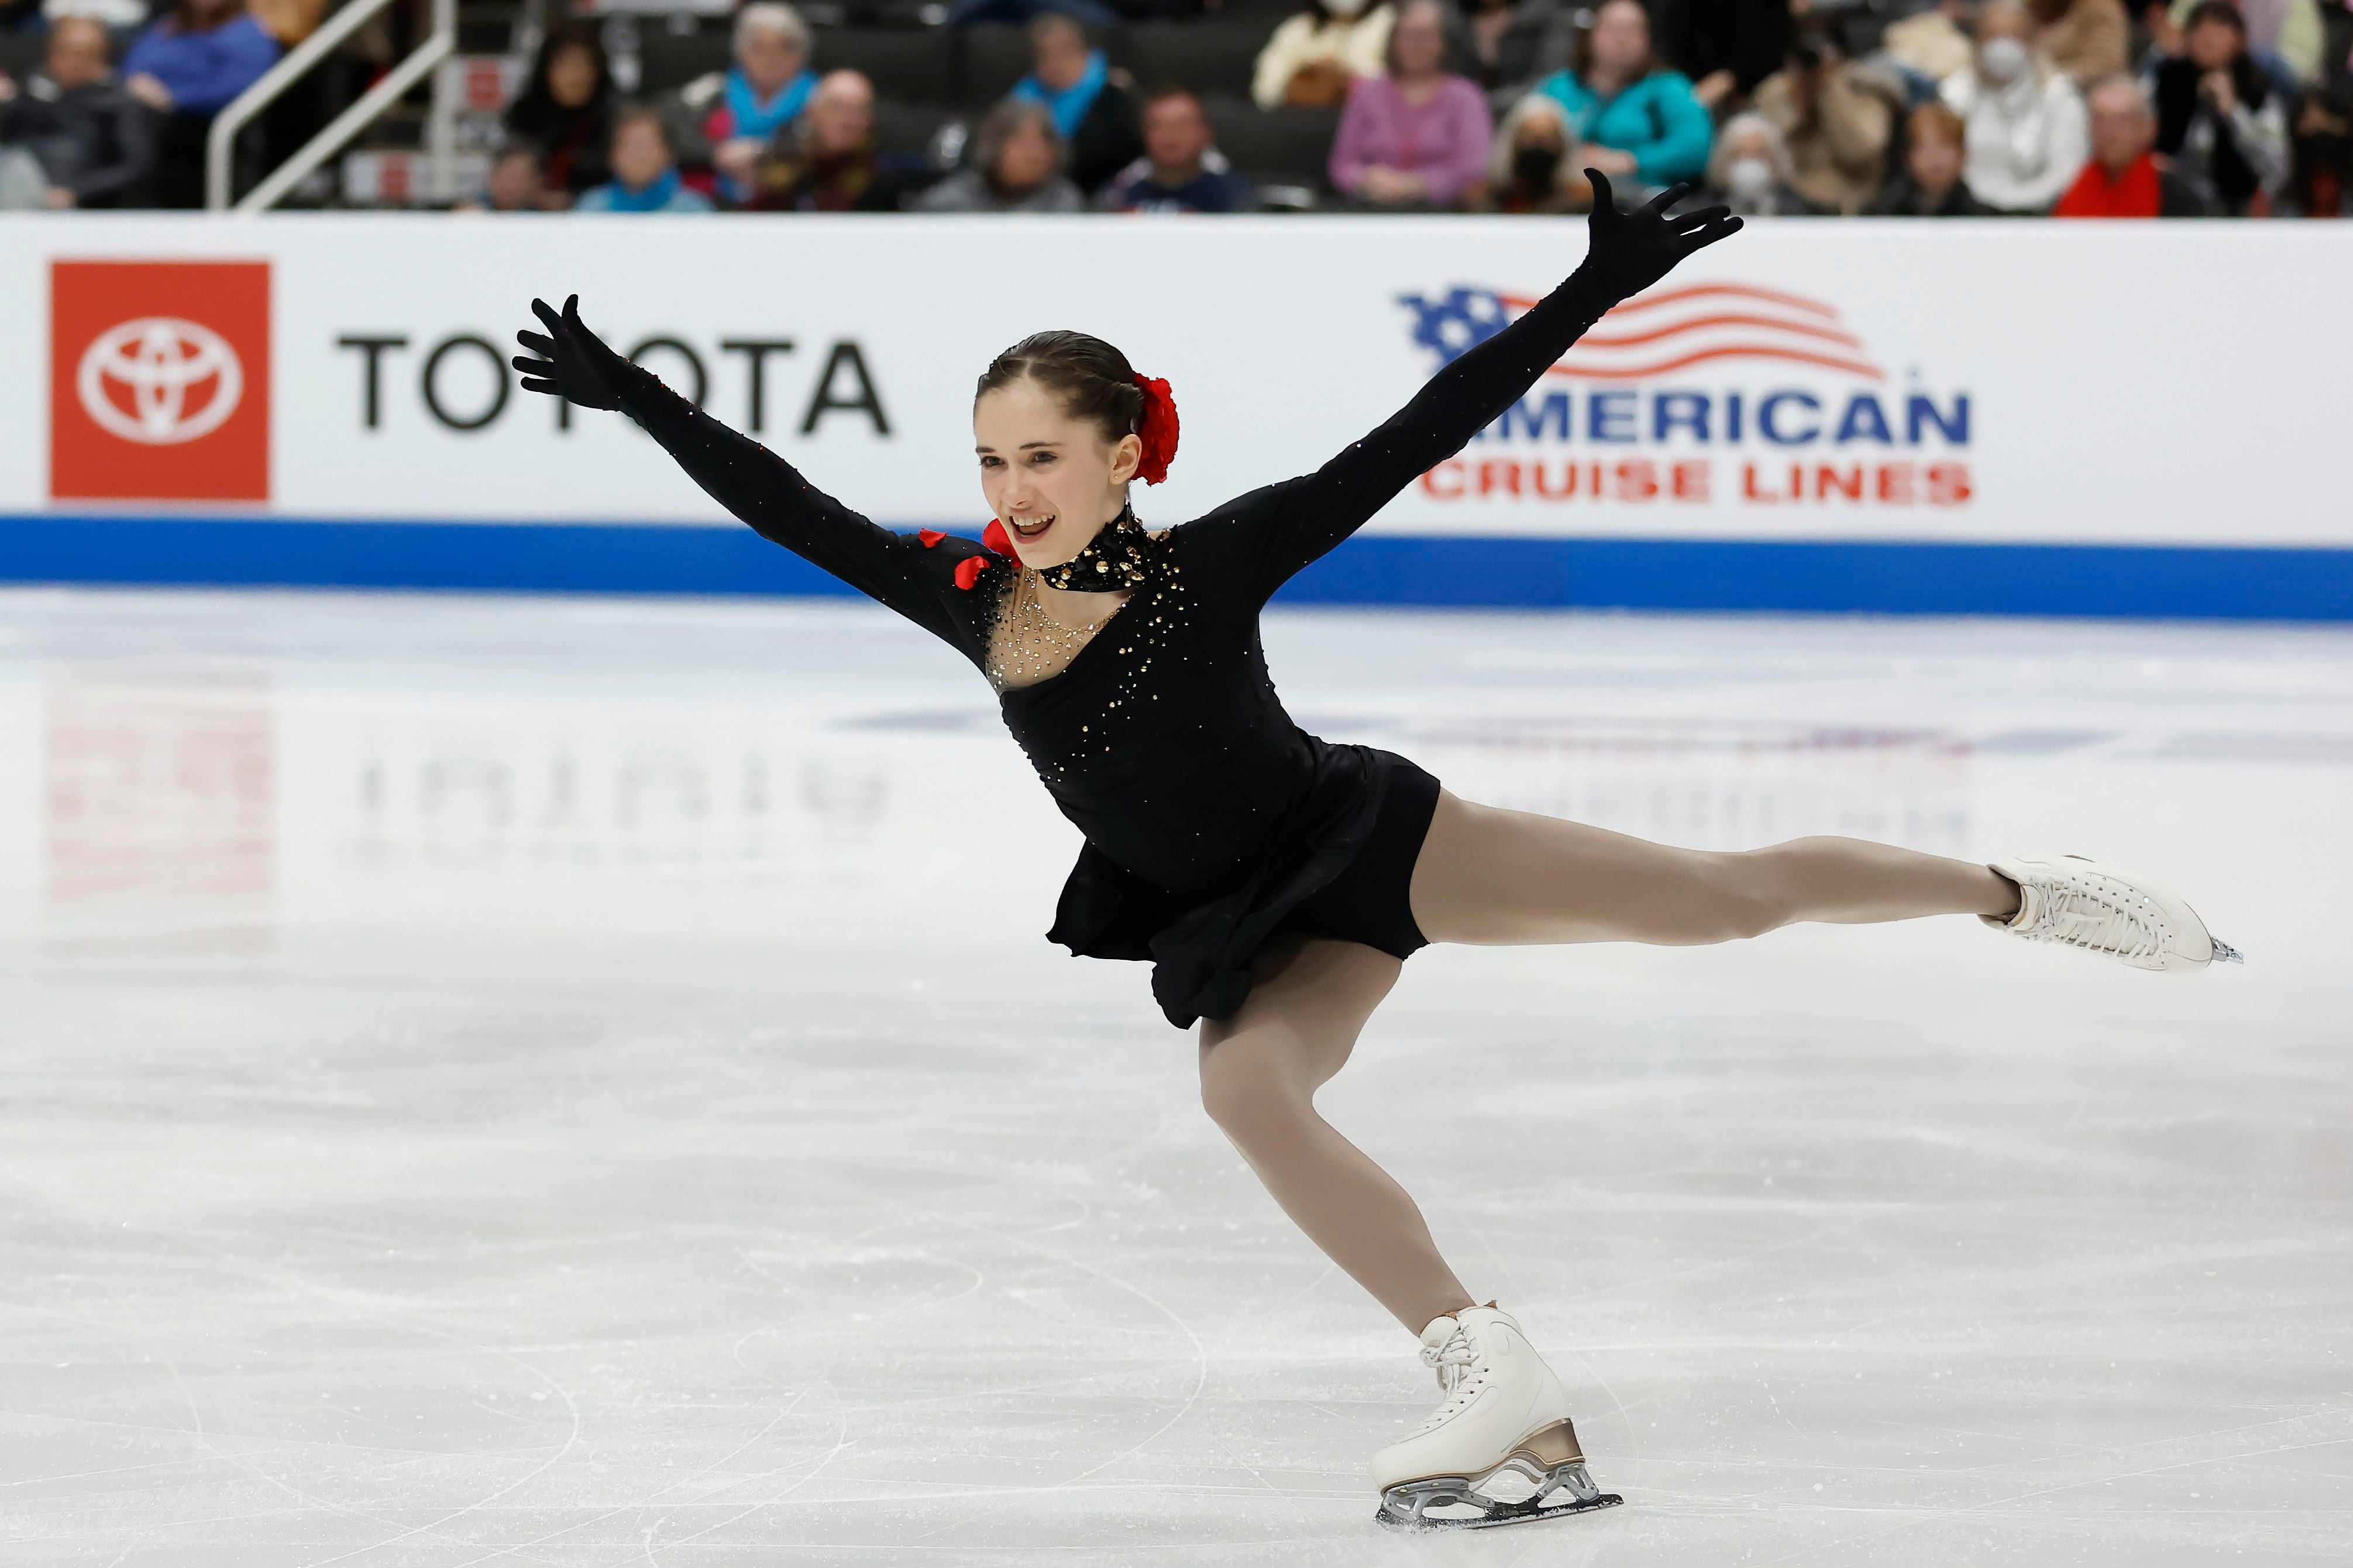 15-Year-Old Skating Star From South Jersey Heads To Grand Prix Finals